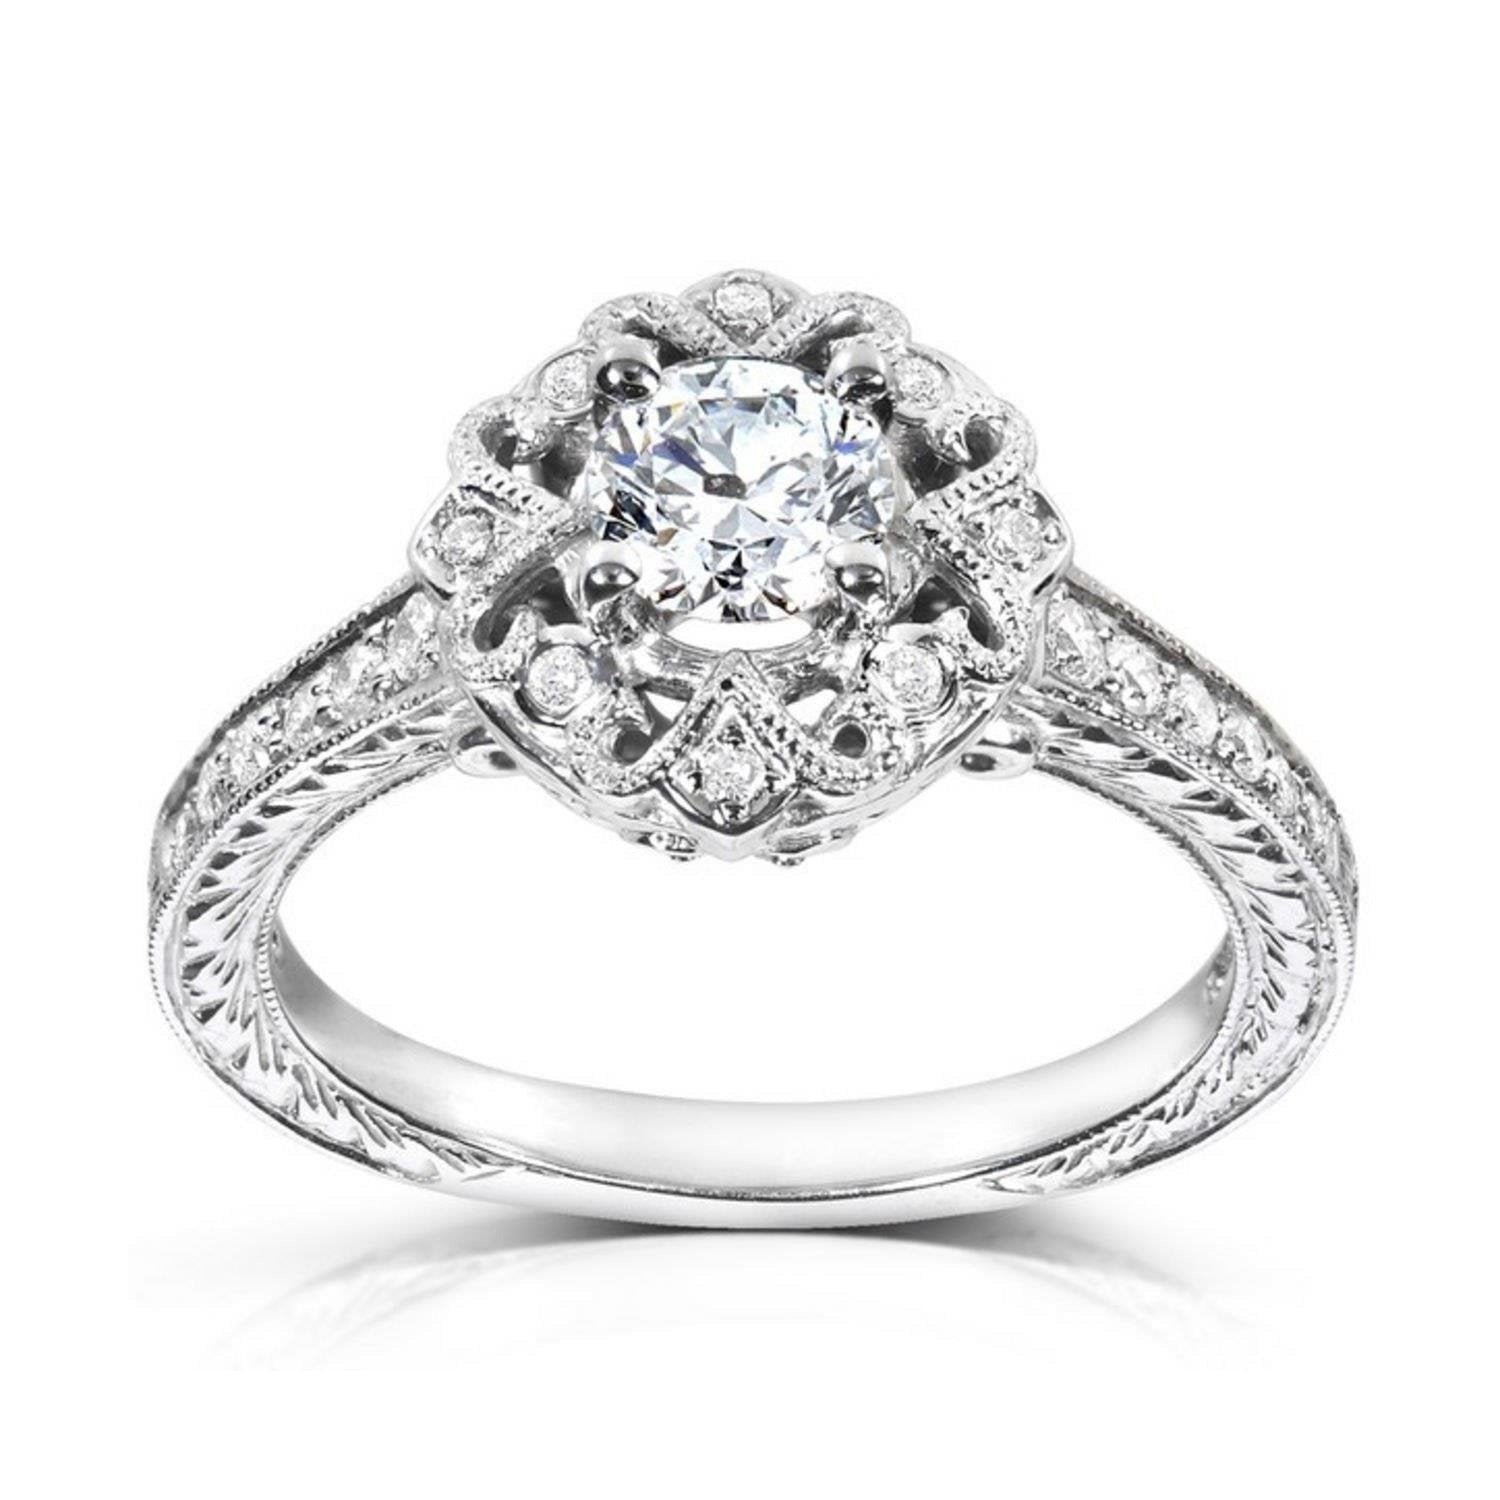 Antique Style Real Diamond Engagement Ring 2.25 Carats White Gold Jewelry